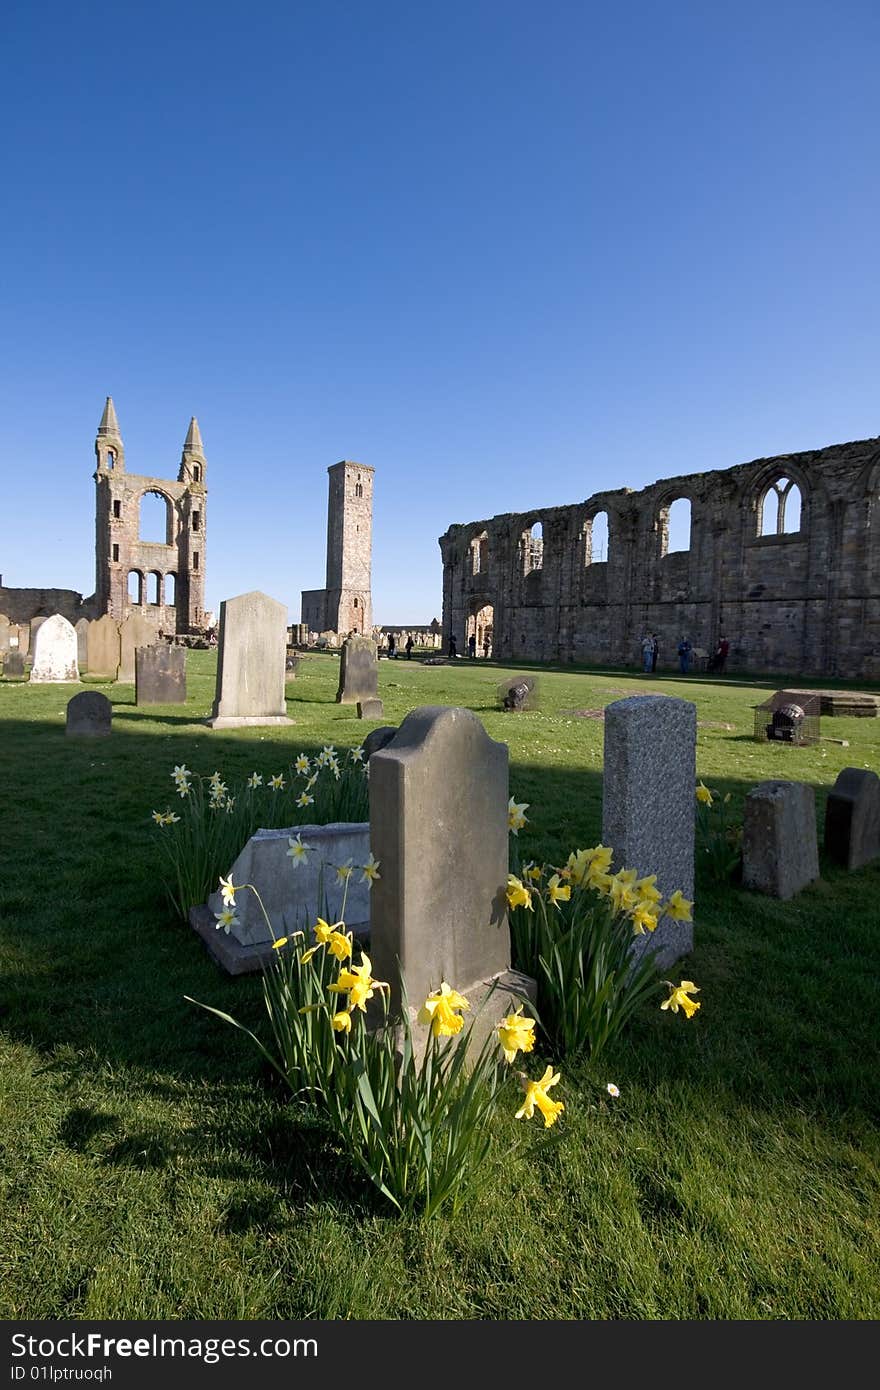 Part of the cemetary and cathedral ruins in St Andrews, Scotland. Part of the cemetary and cathedral ruins in St Andrews, Scotland.